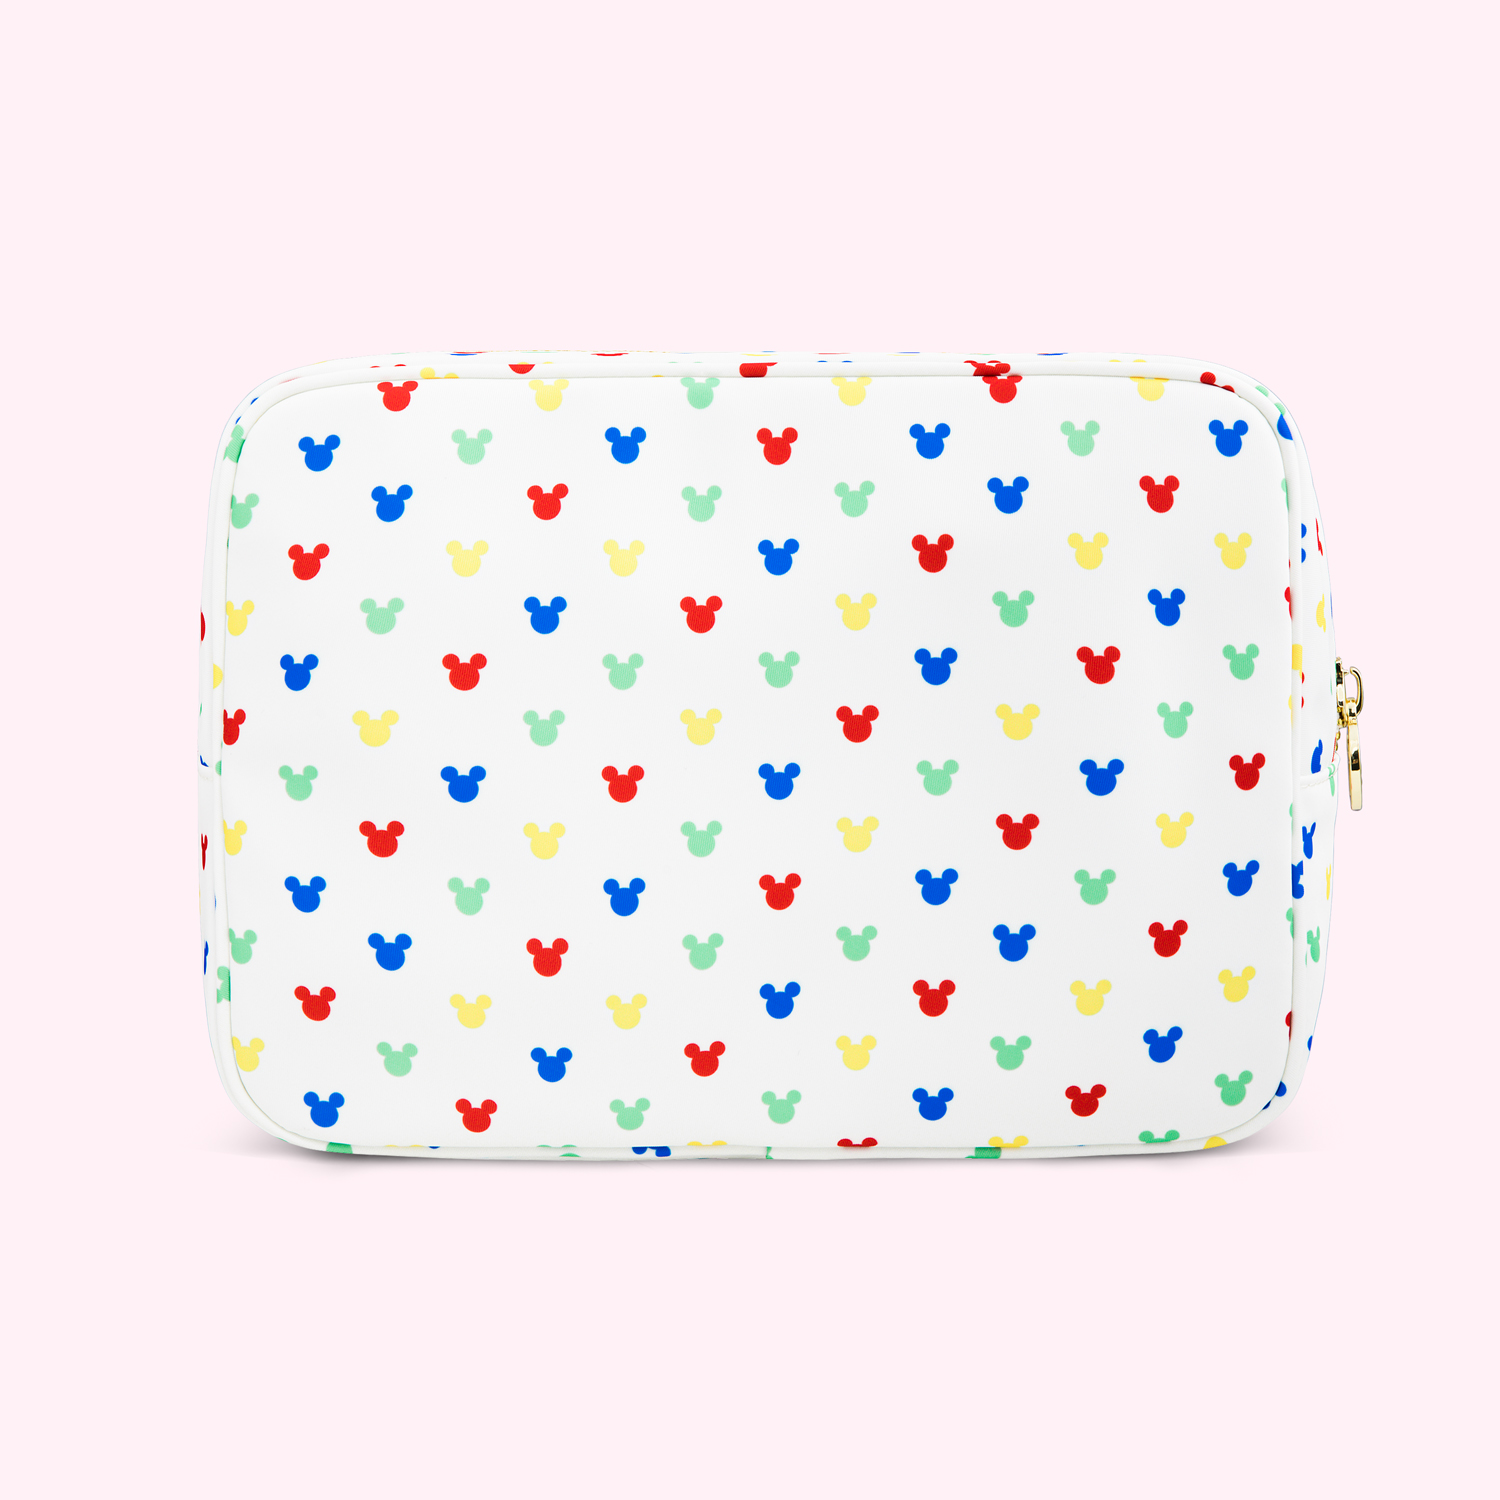 Stoney Clover Lane Checkered Small Pouch - 100% Exclusive